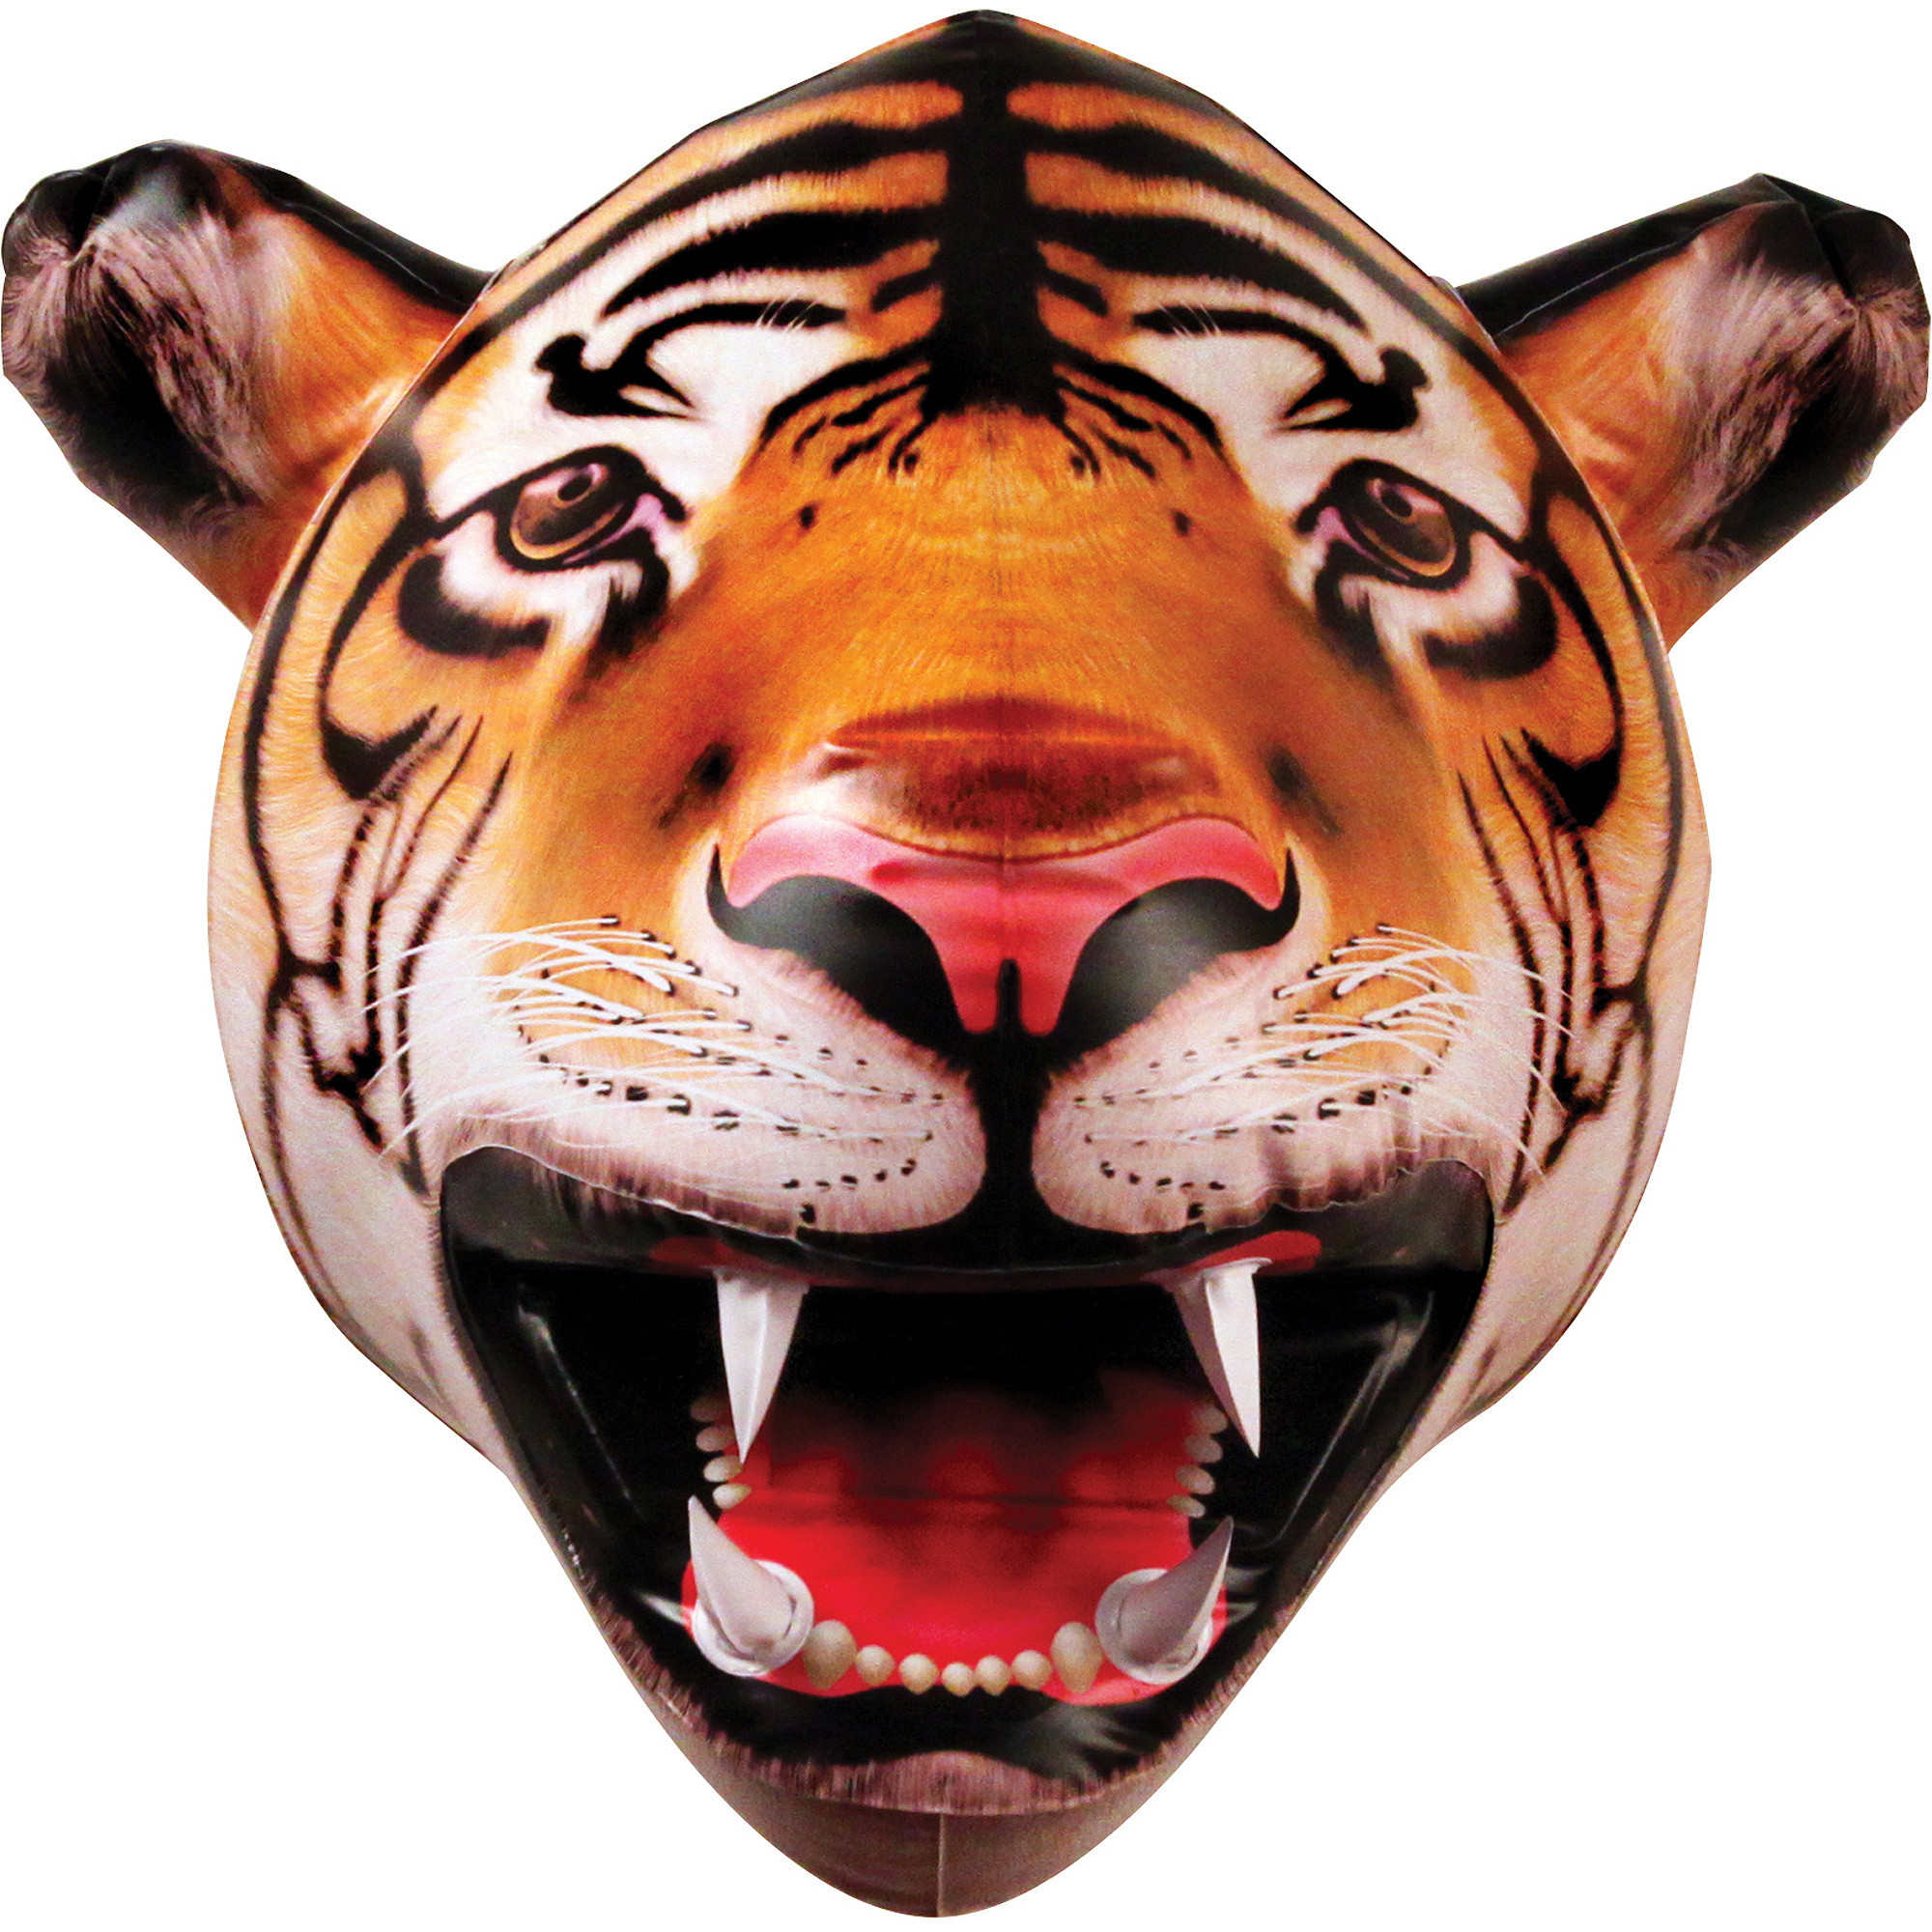 Inflatable Tiger Head - image 1 of 1